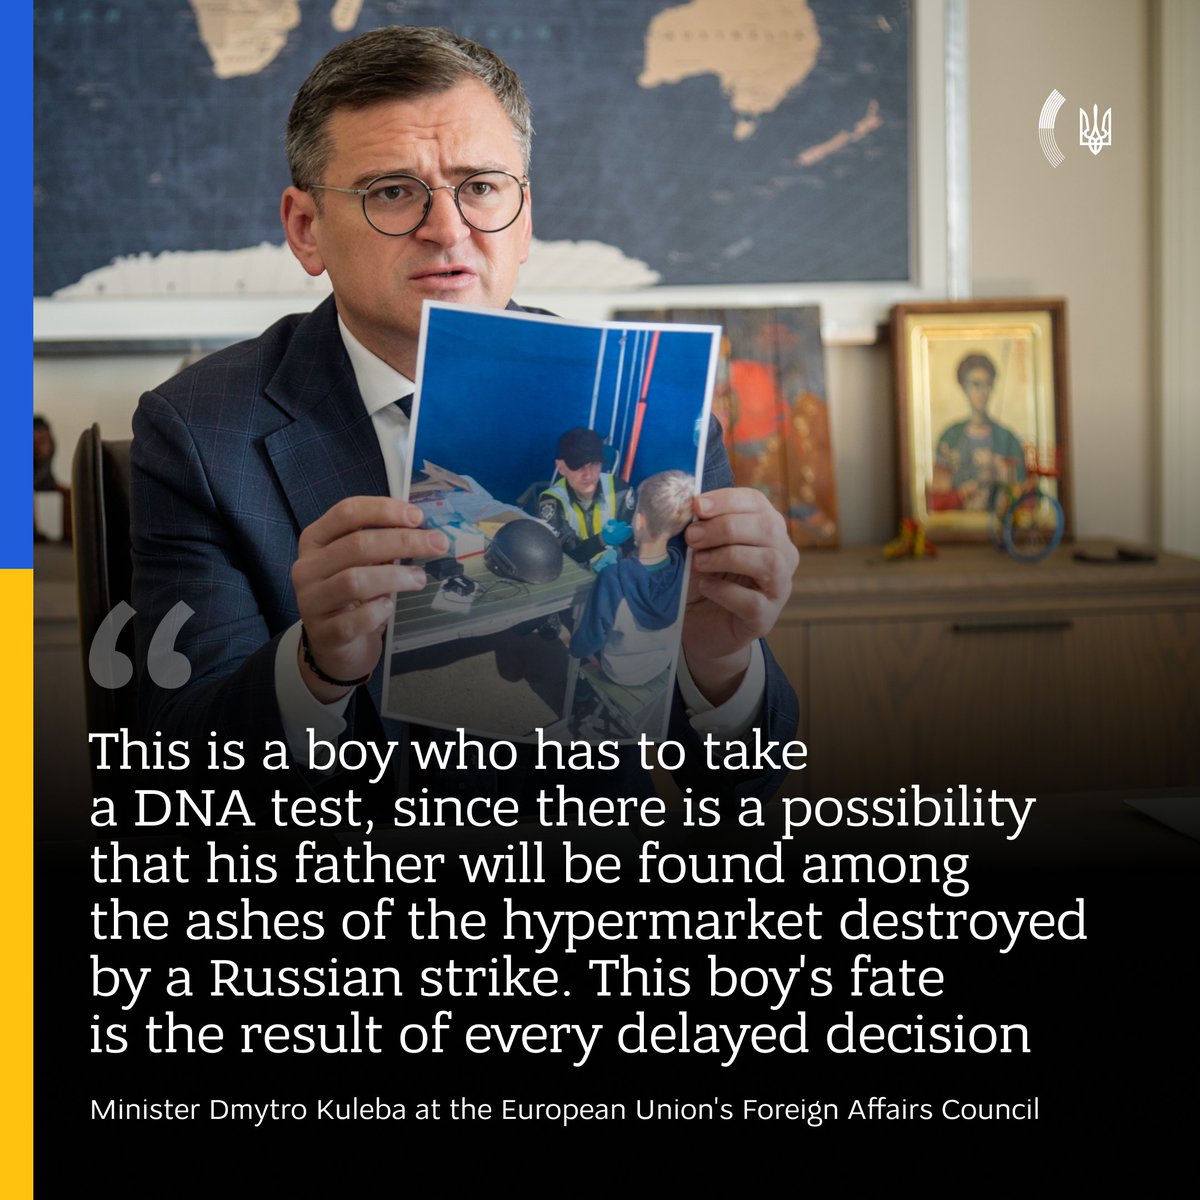 💬 'There is no time for reflection, we need action,' – 🇺🇦 Minister @DmytroKuleba took part in the EU Foreign Affairs Council meeting where he showed a photo of a boy from Kharkiv, whose father could have been among those killed in the hypermarket destroyed by Russians on May 25.